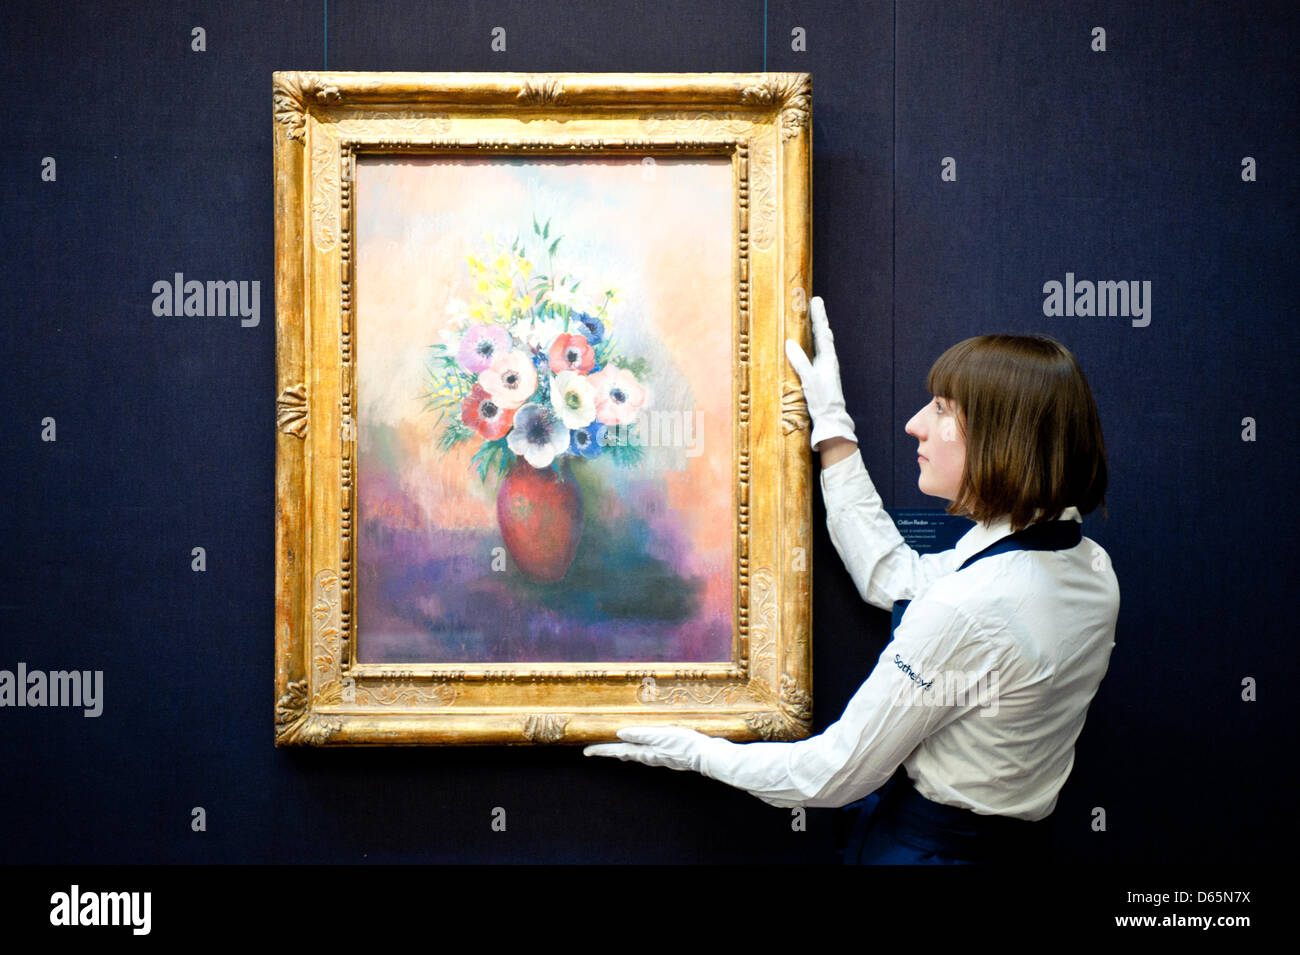 London, UK. 12th April 2013. Sotheby's employee poses in front of Odilon Redon 'Vase d'anemones' (Est. $1,2-1,5 million). The work will go on sale at Sotheby’s New York in May 2013. The Blockbuster sales at include works by Richter, Modigliani, Picasso, Rodin, Bacon, Cezanne. Credit: Piero Cruciatti / Alamy Live News Stock Photo